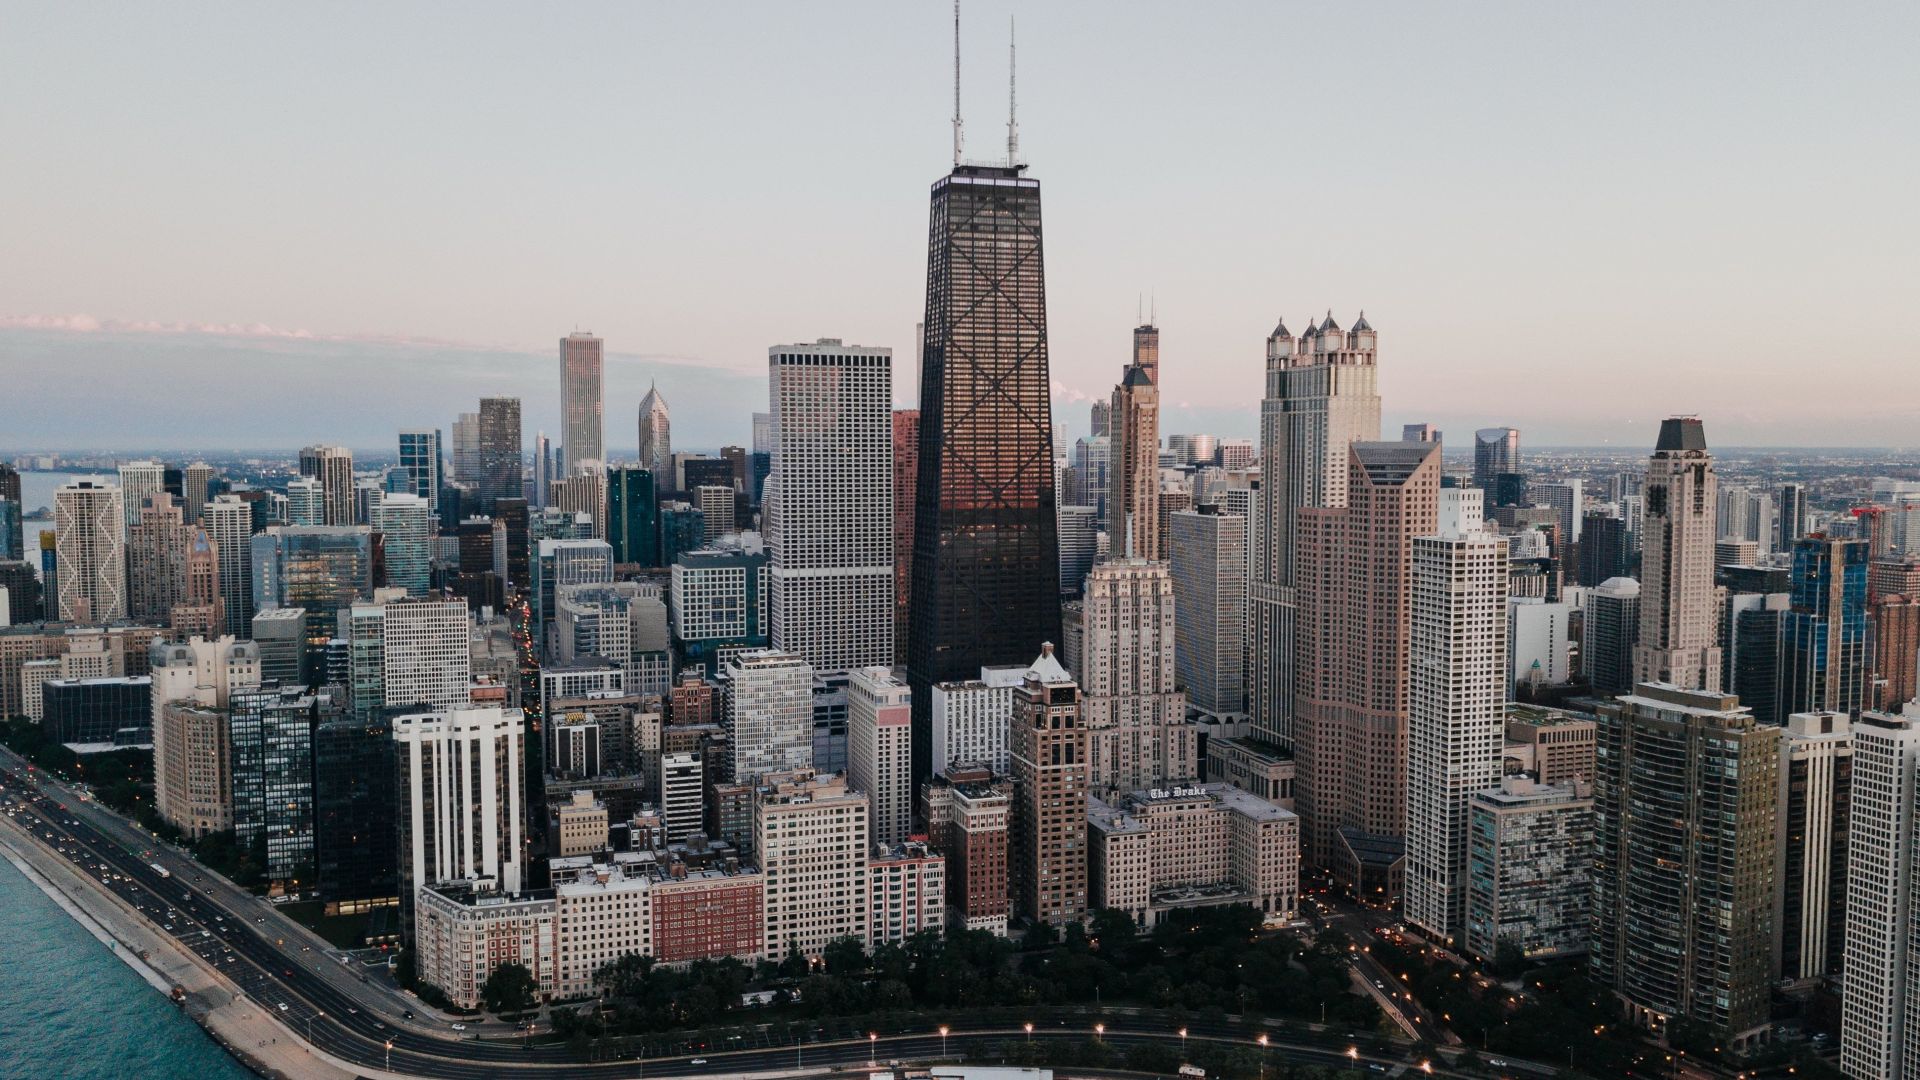 Download wallpapers 4k Chicago skyscrapers business centers evening  sunset modern buildings Chicago cityscape Illinois USA for desktop  free Pictures for desktop free